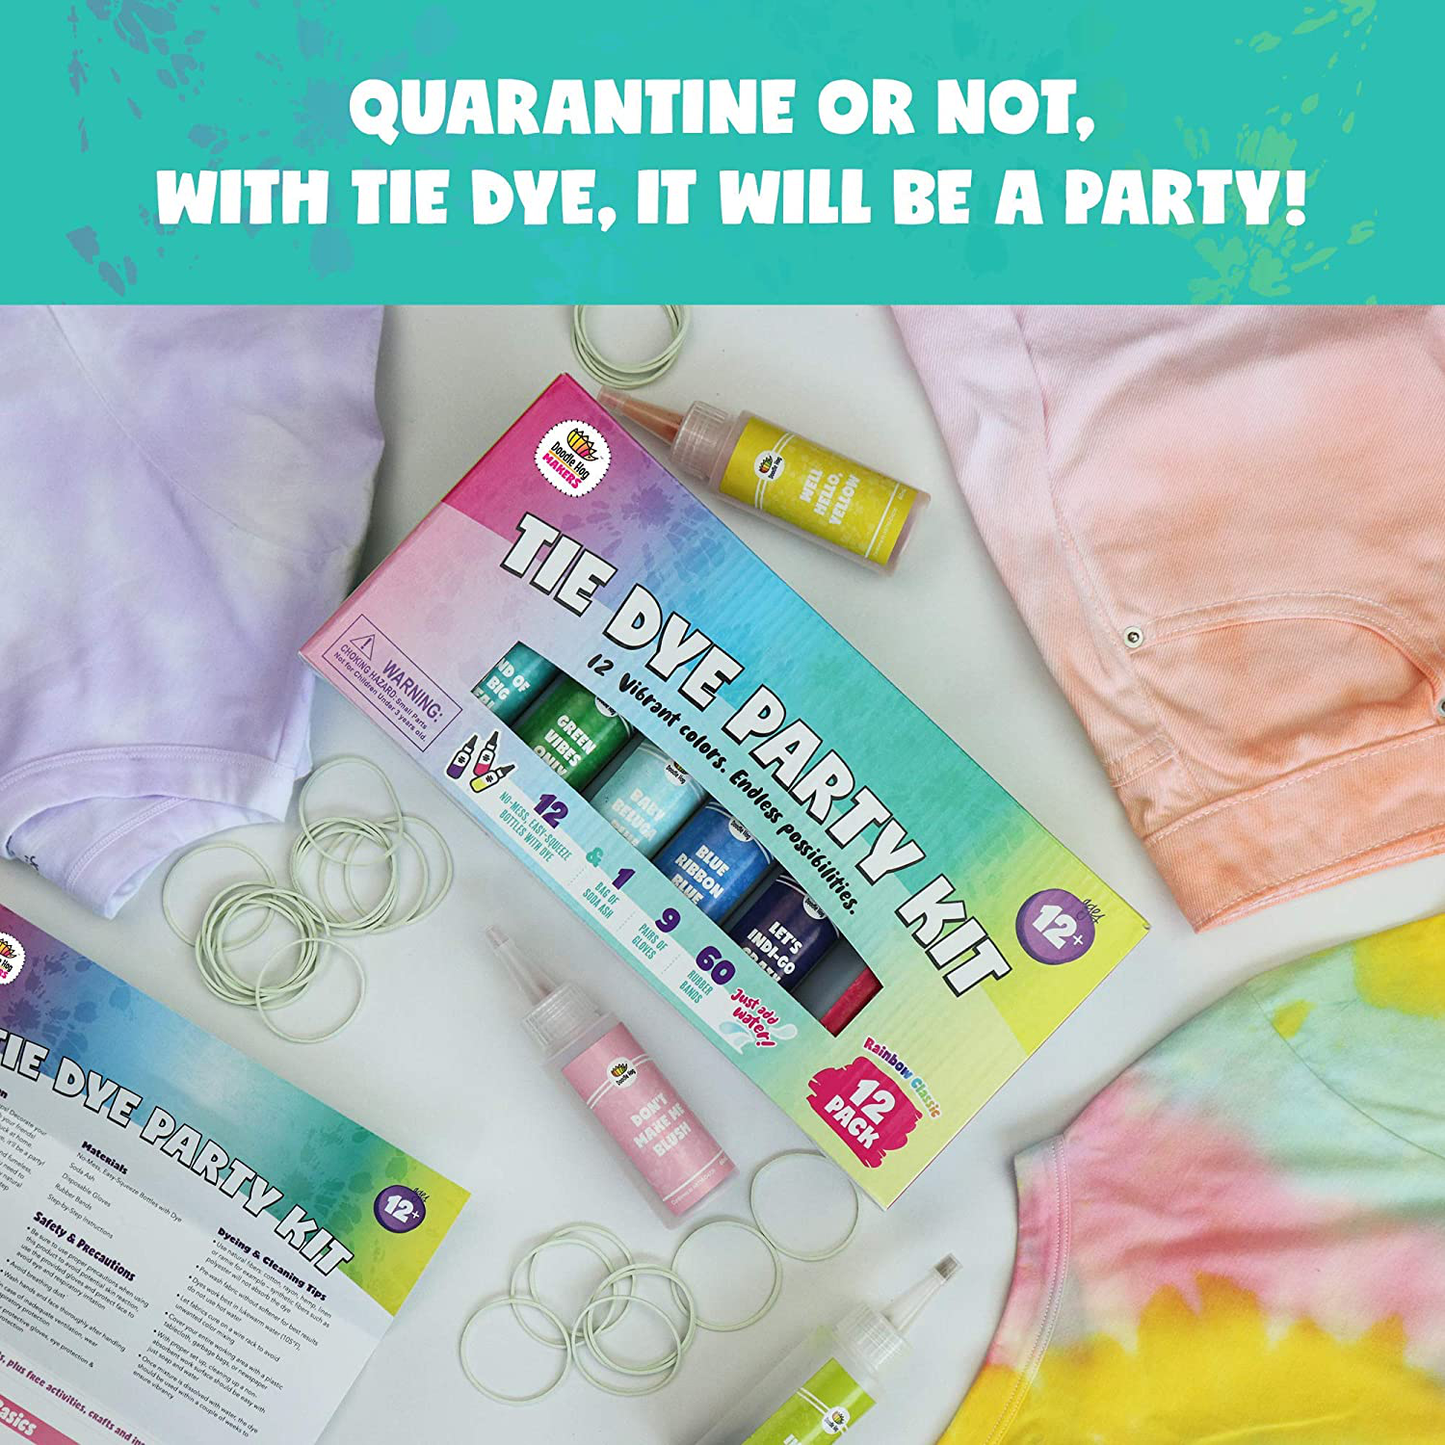 Doodlehog Easy Tie Dye Party Kit for Kids, Adults, and Groups. Create Vibrant Designs with Non-Toxic Dye